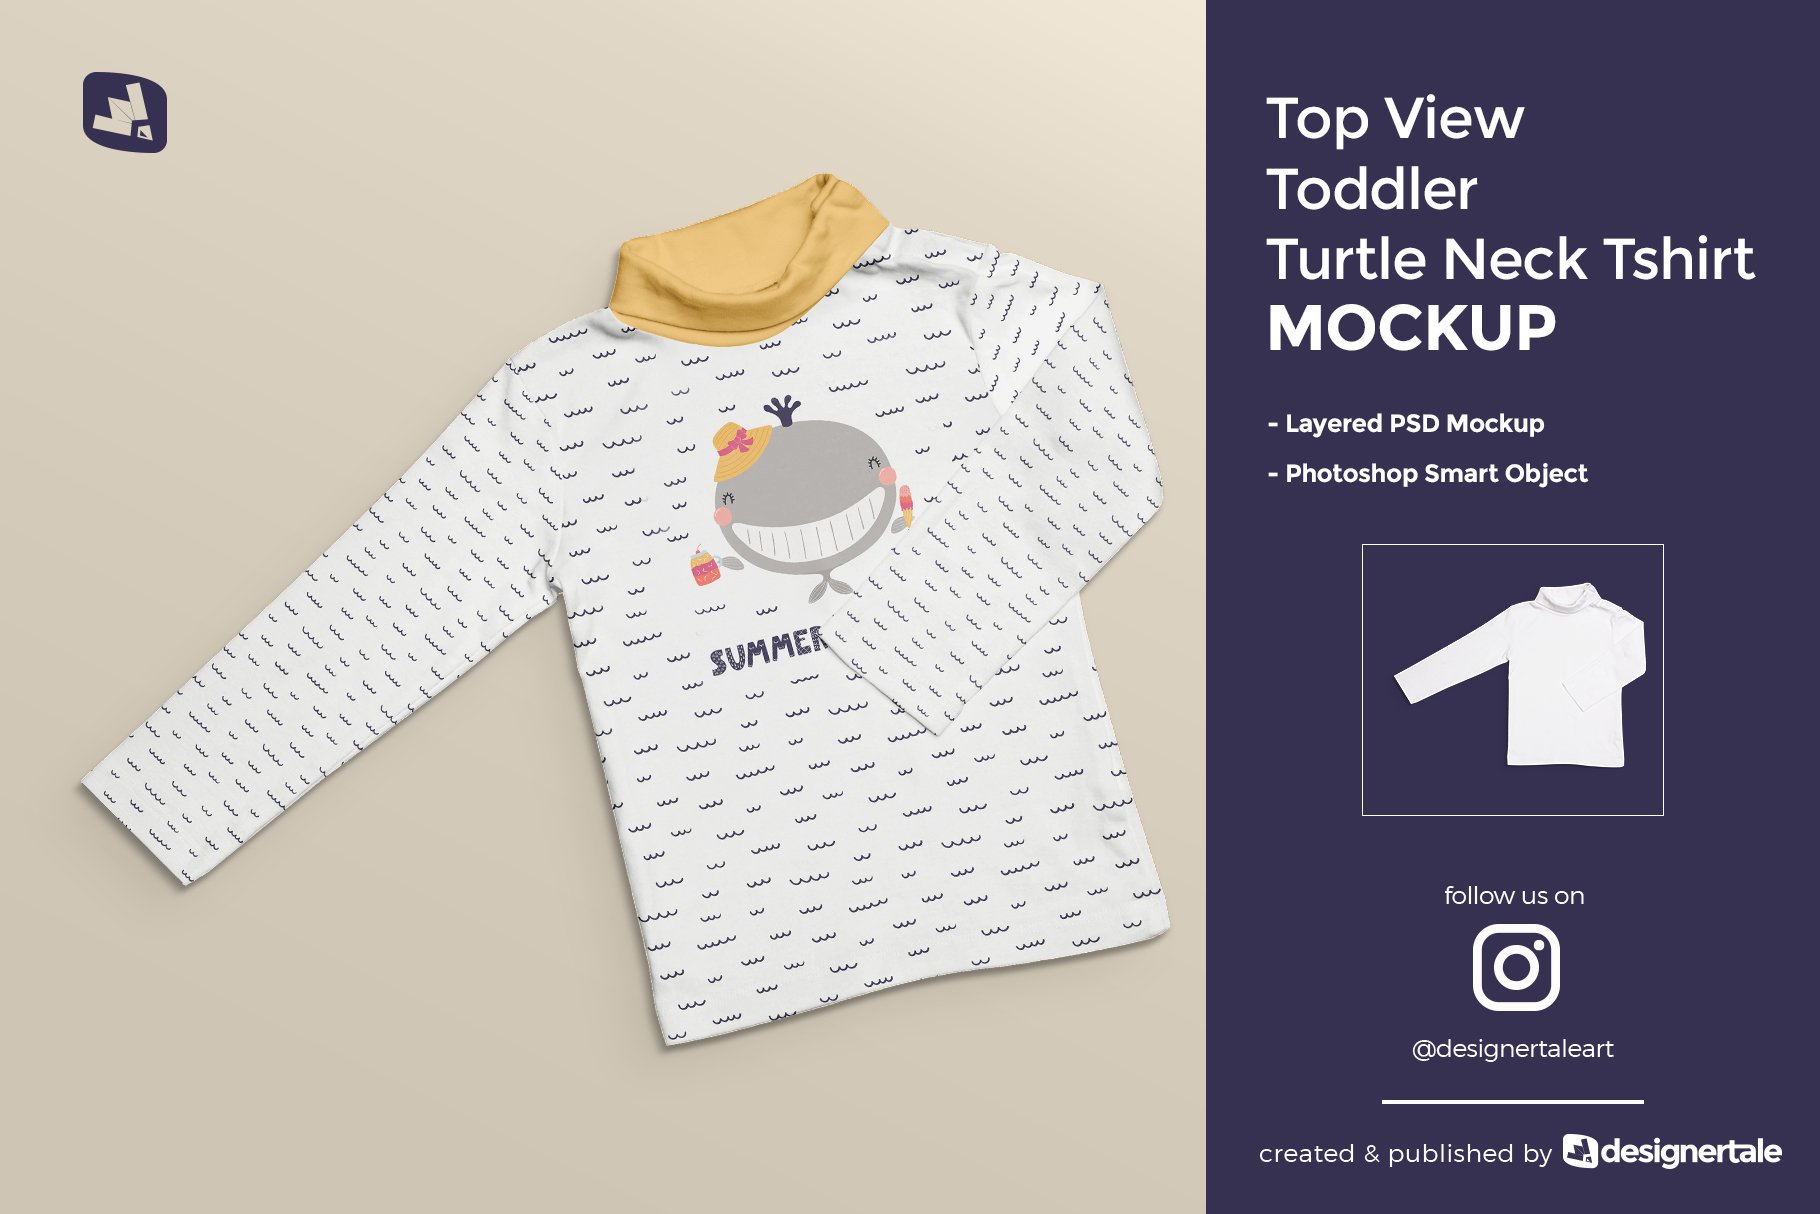 Top View Toddler Turtle Neck Tshirt Mockup